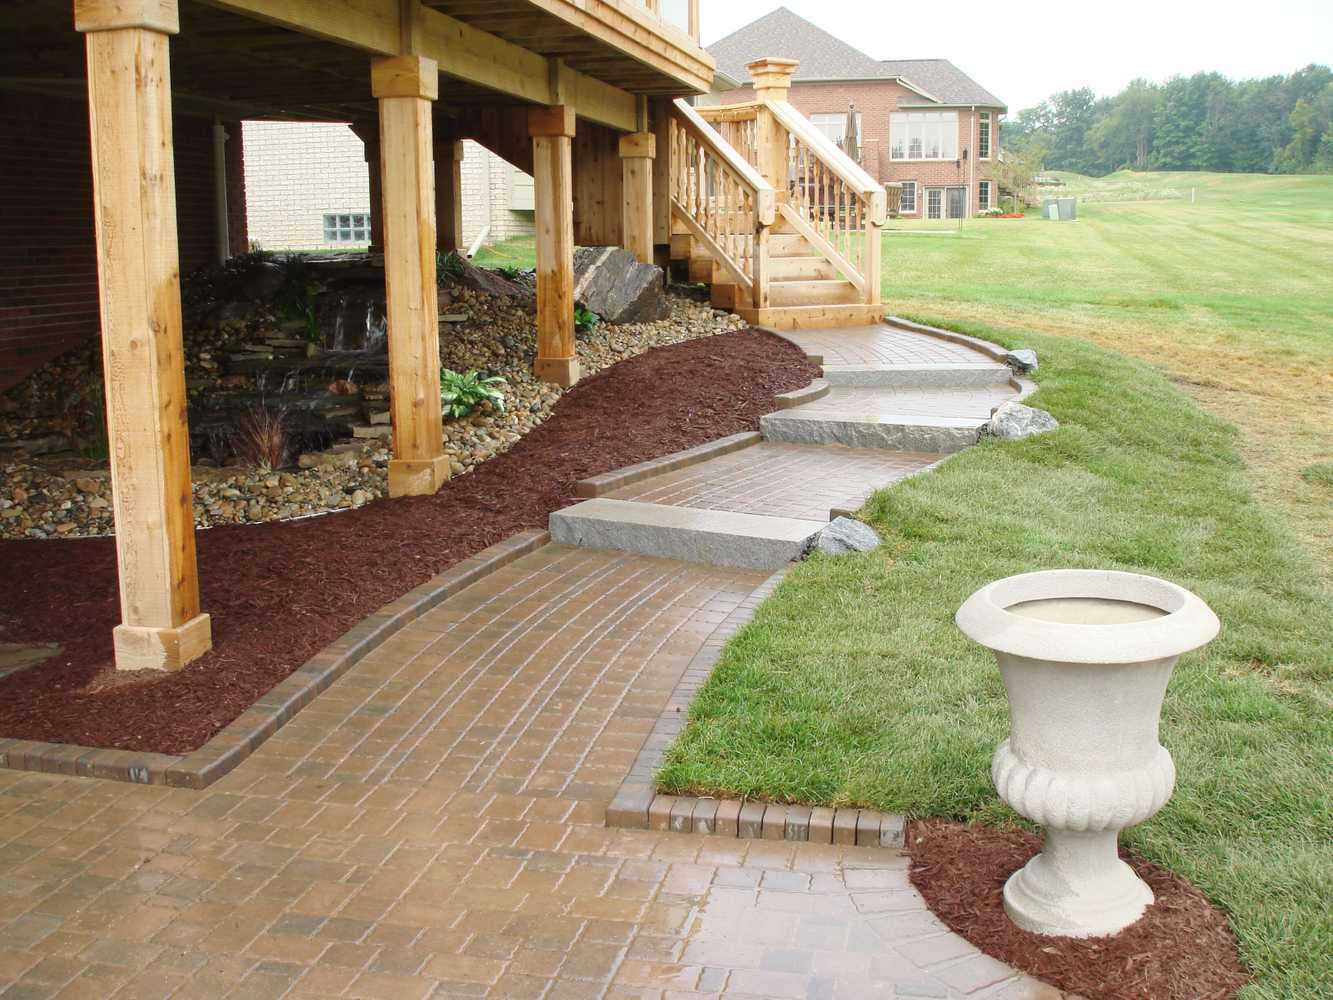 Photo(s) from Vander Landscaping